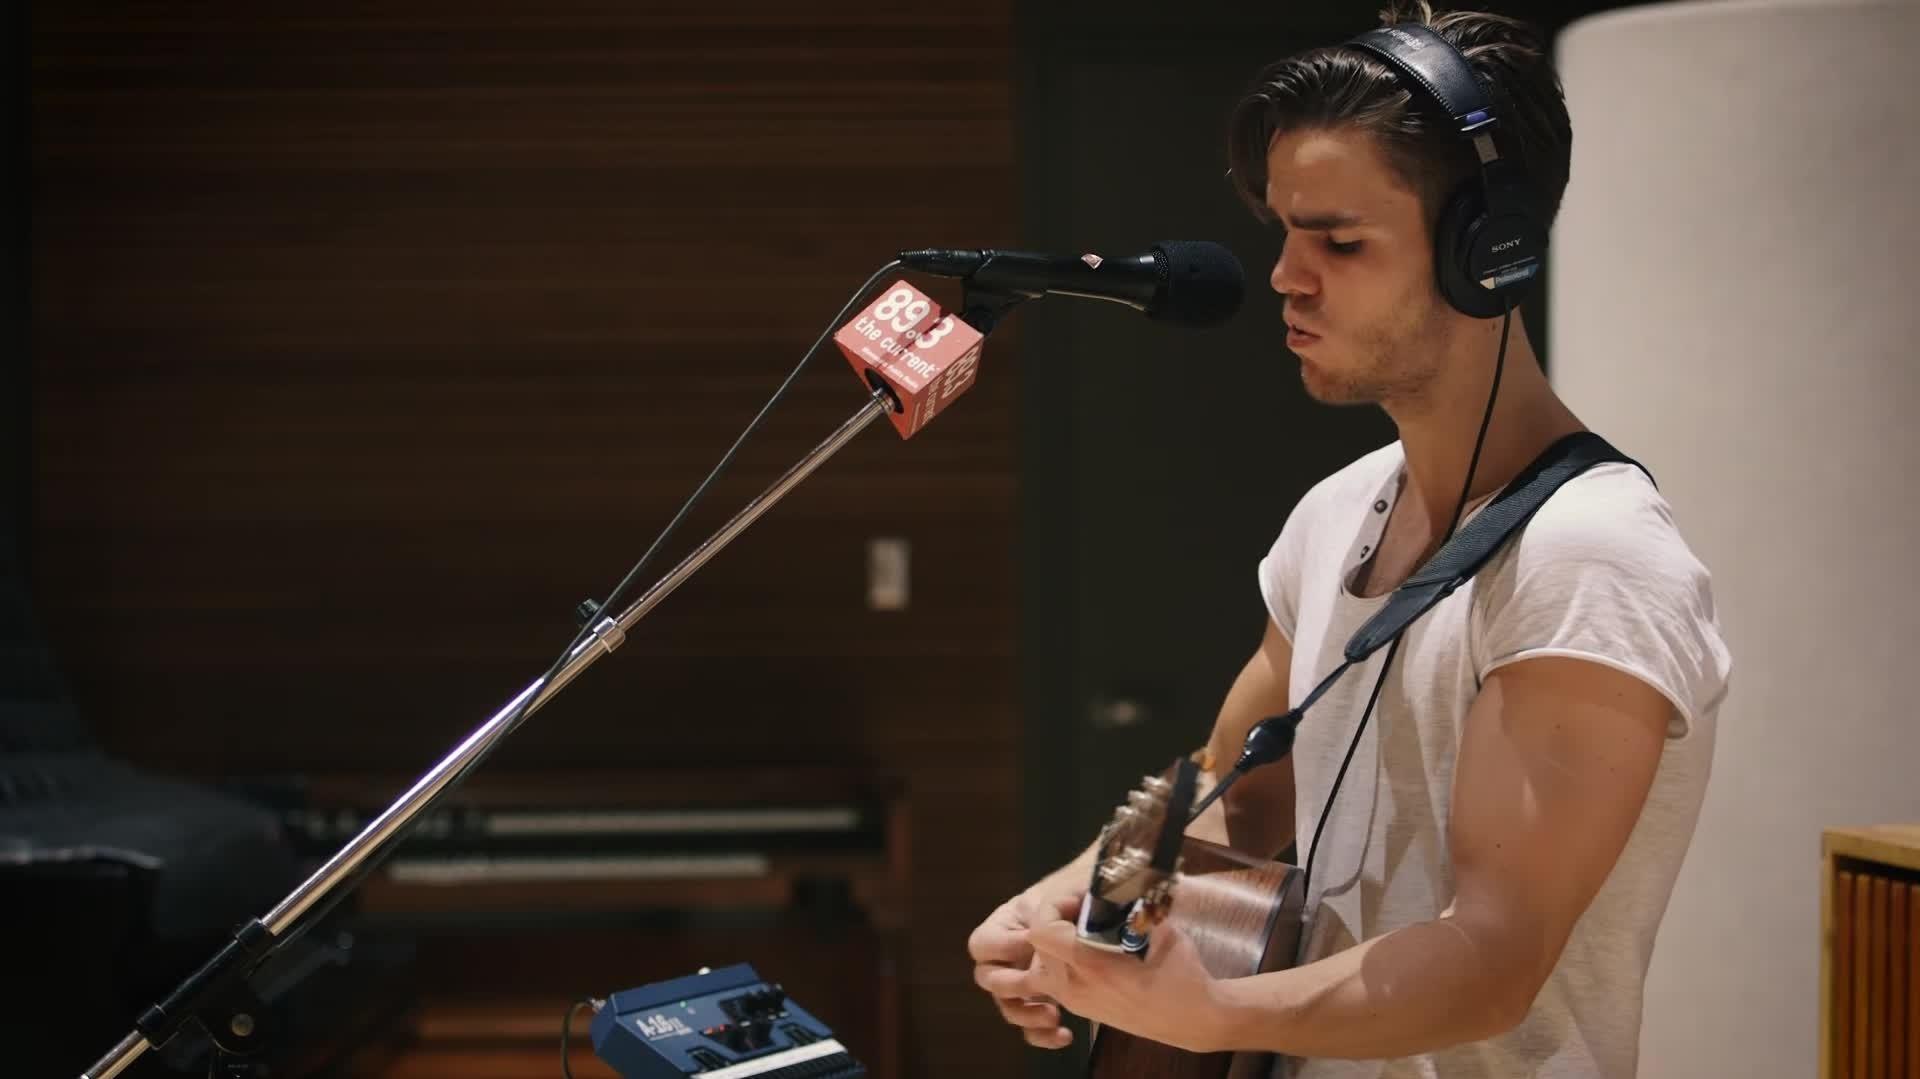 KALEO - Way Down We Go (Live on 89.3 The Current)